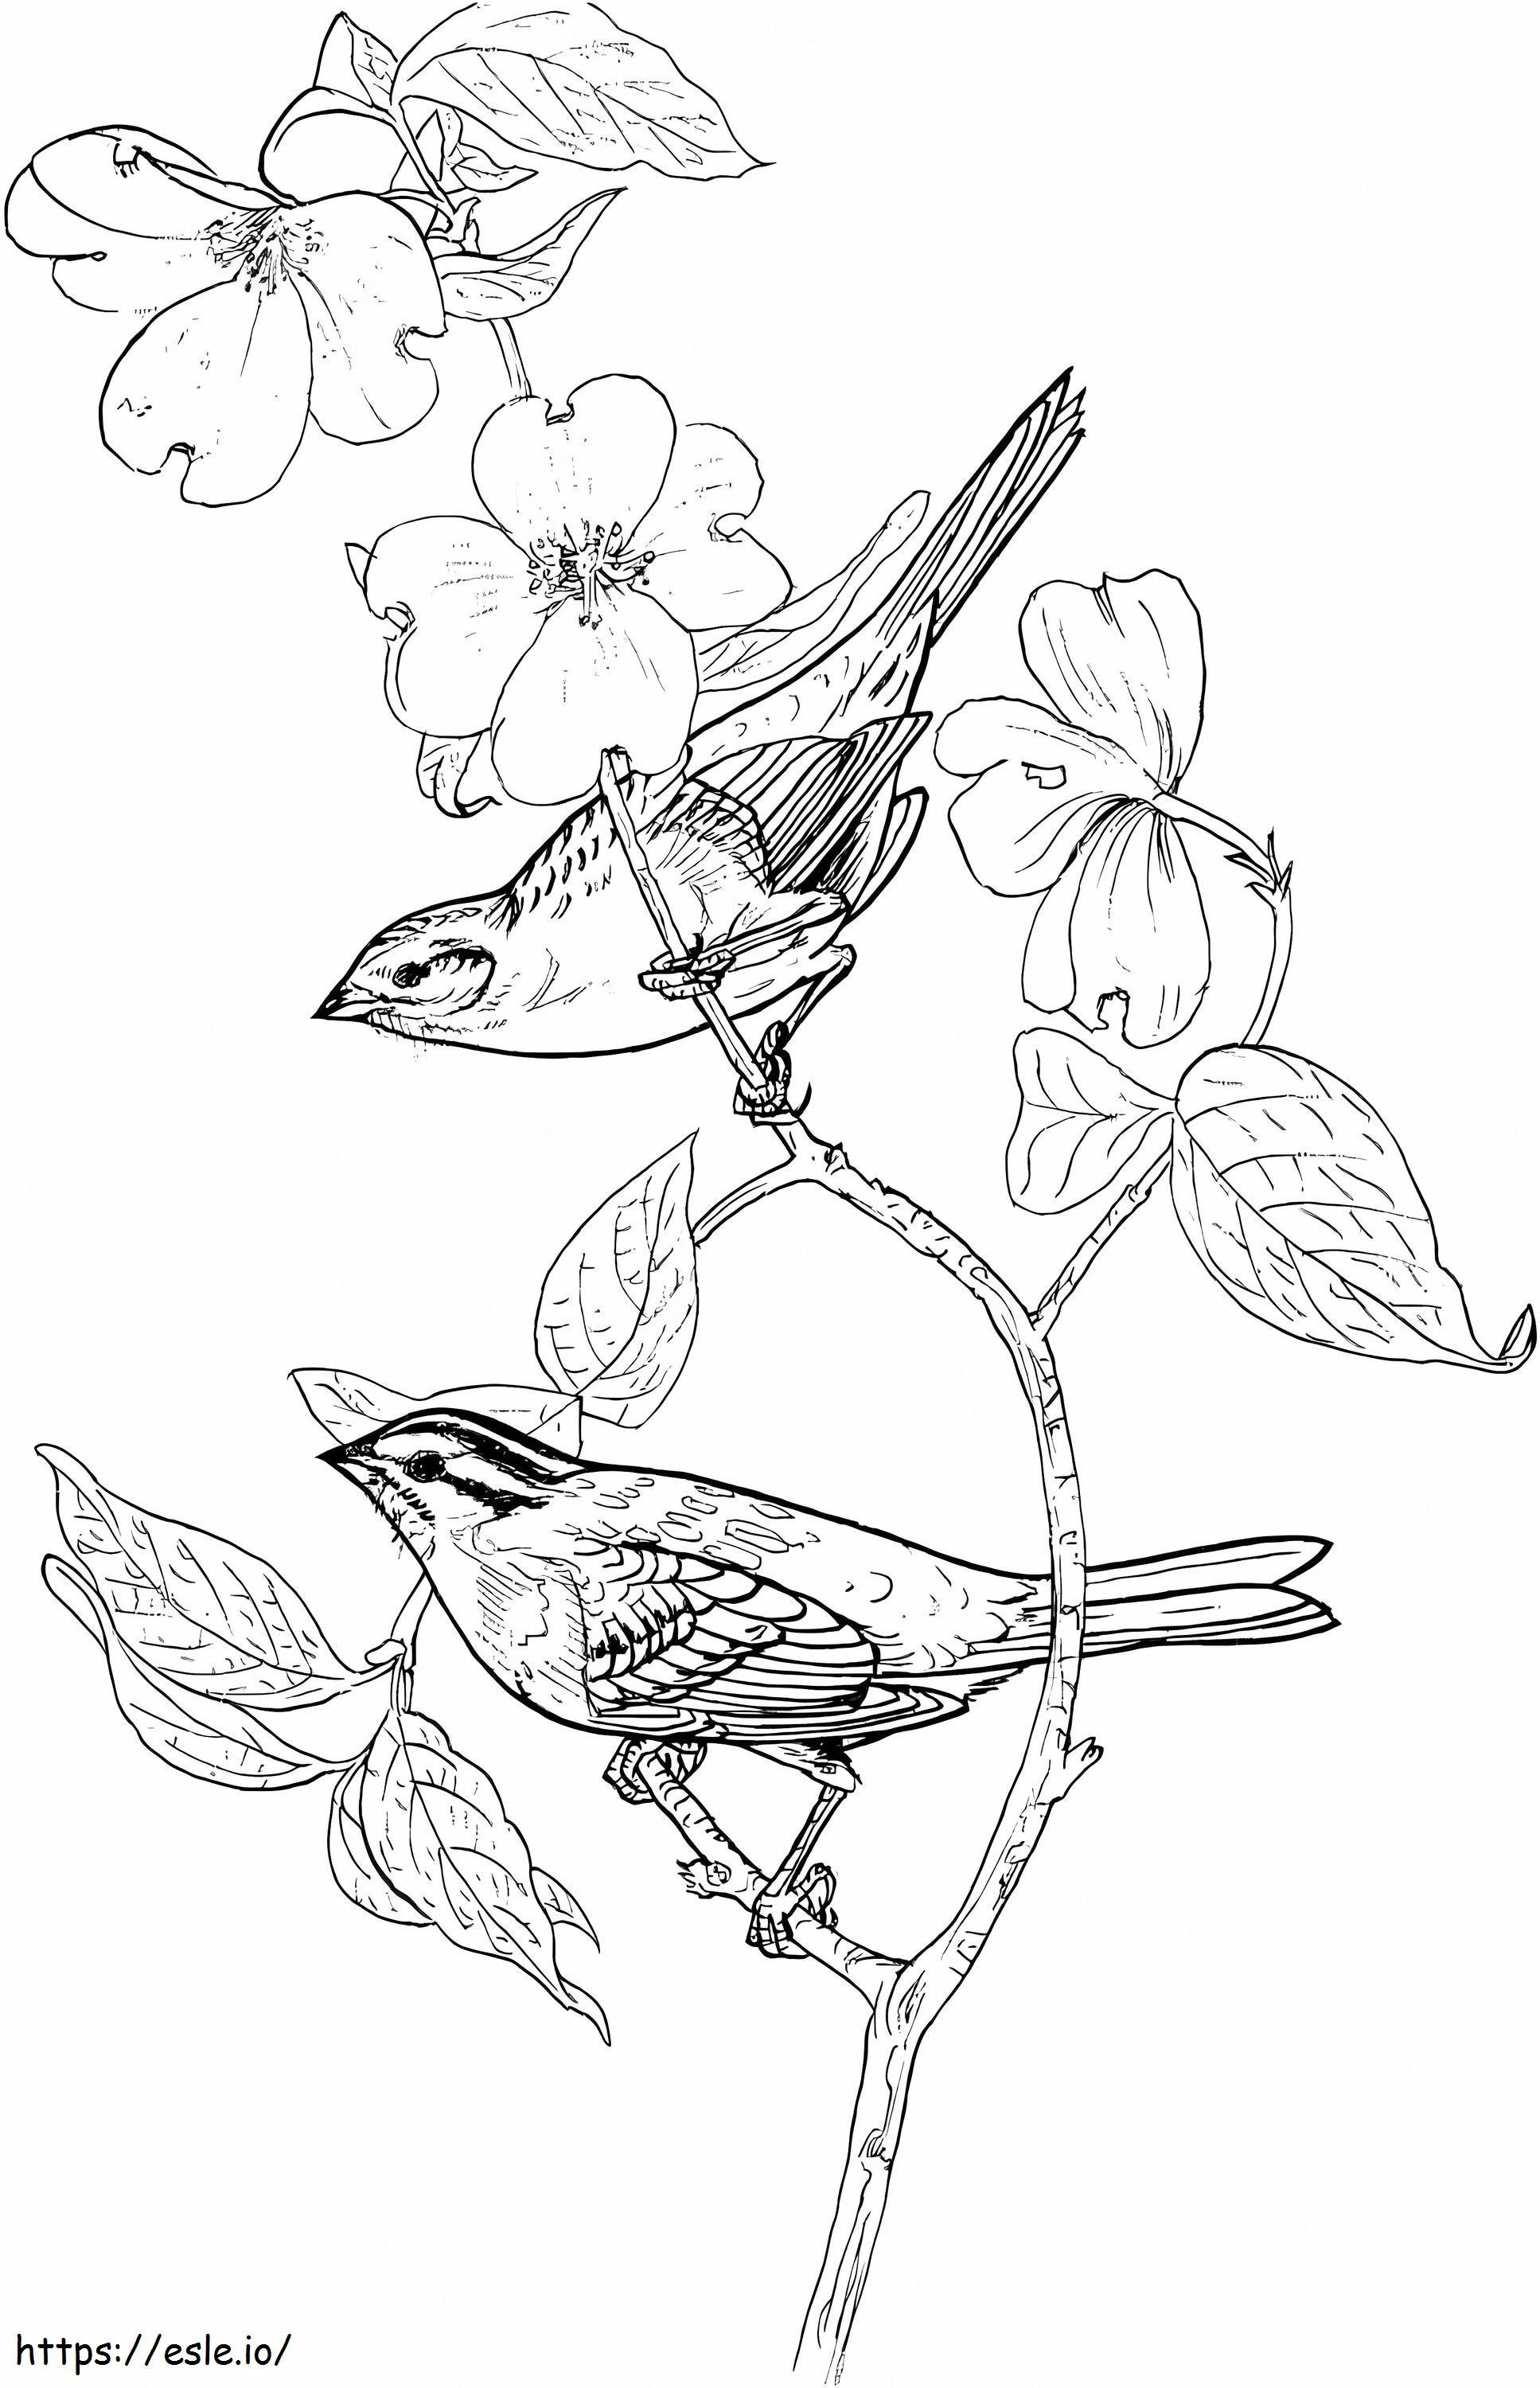 Two Sparrows coloring page